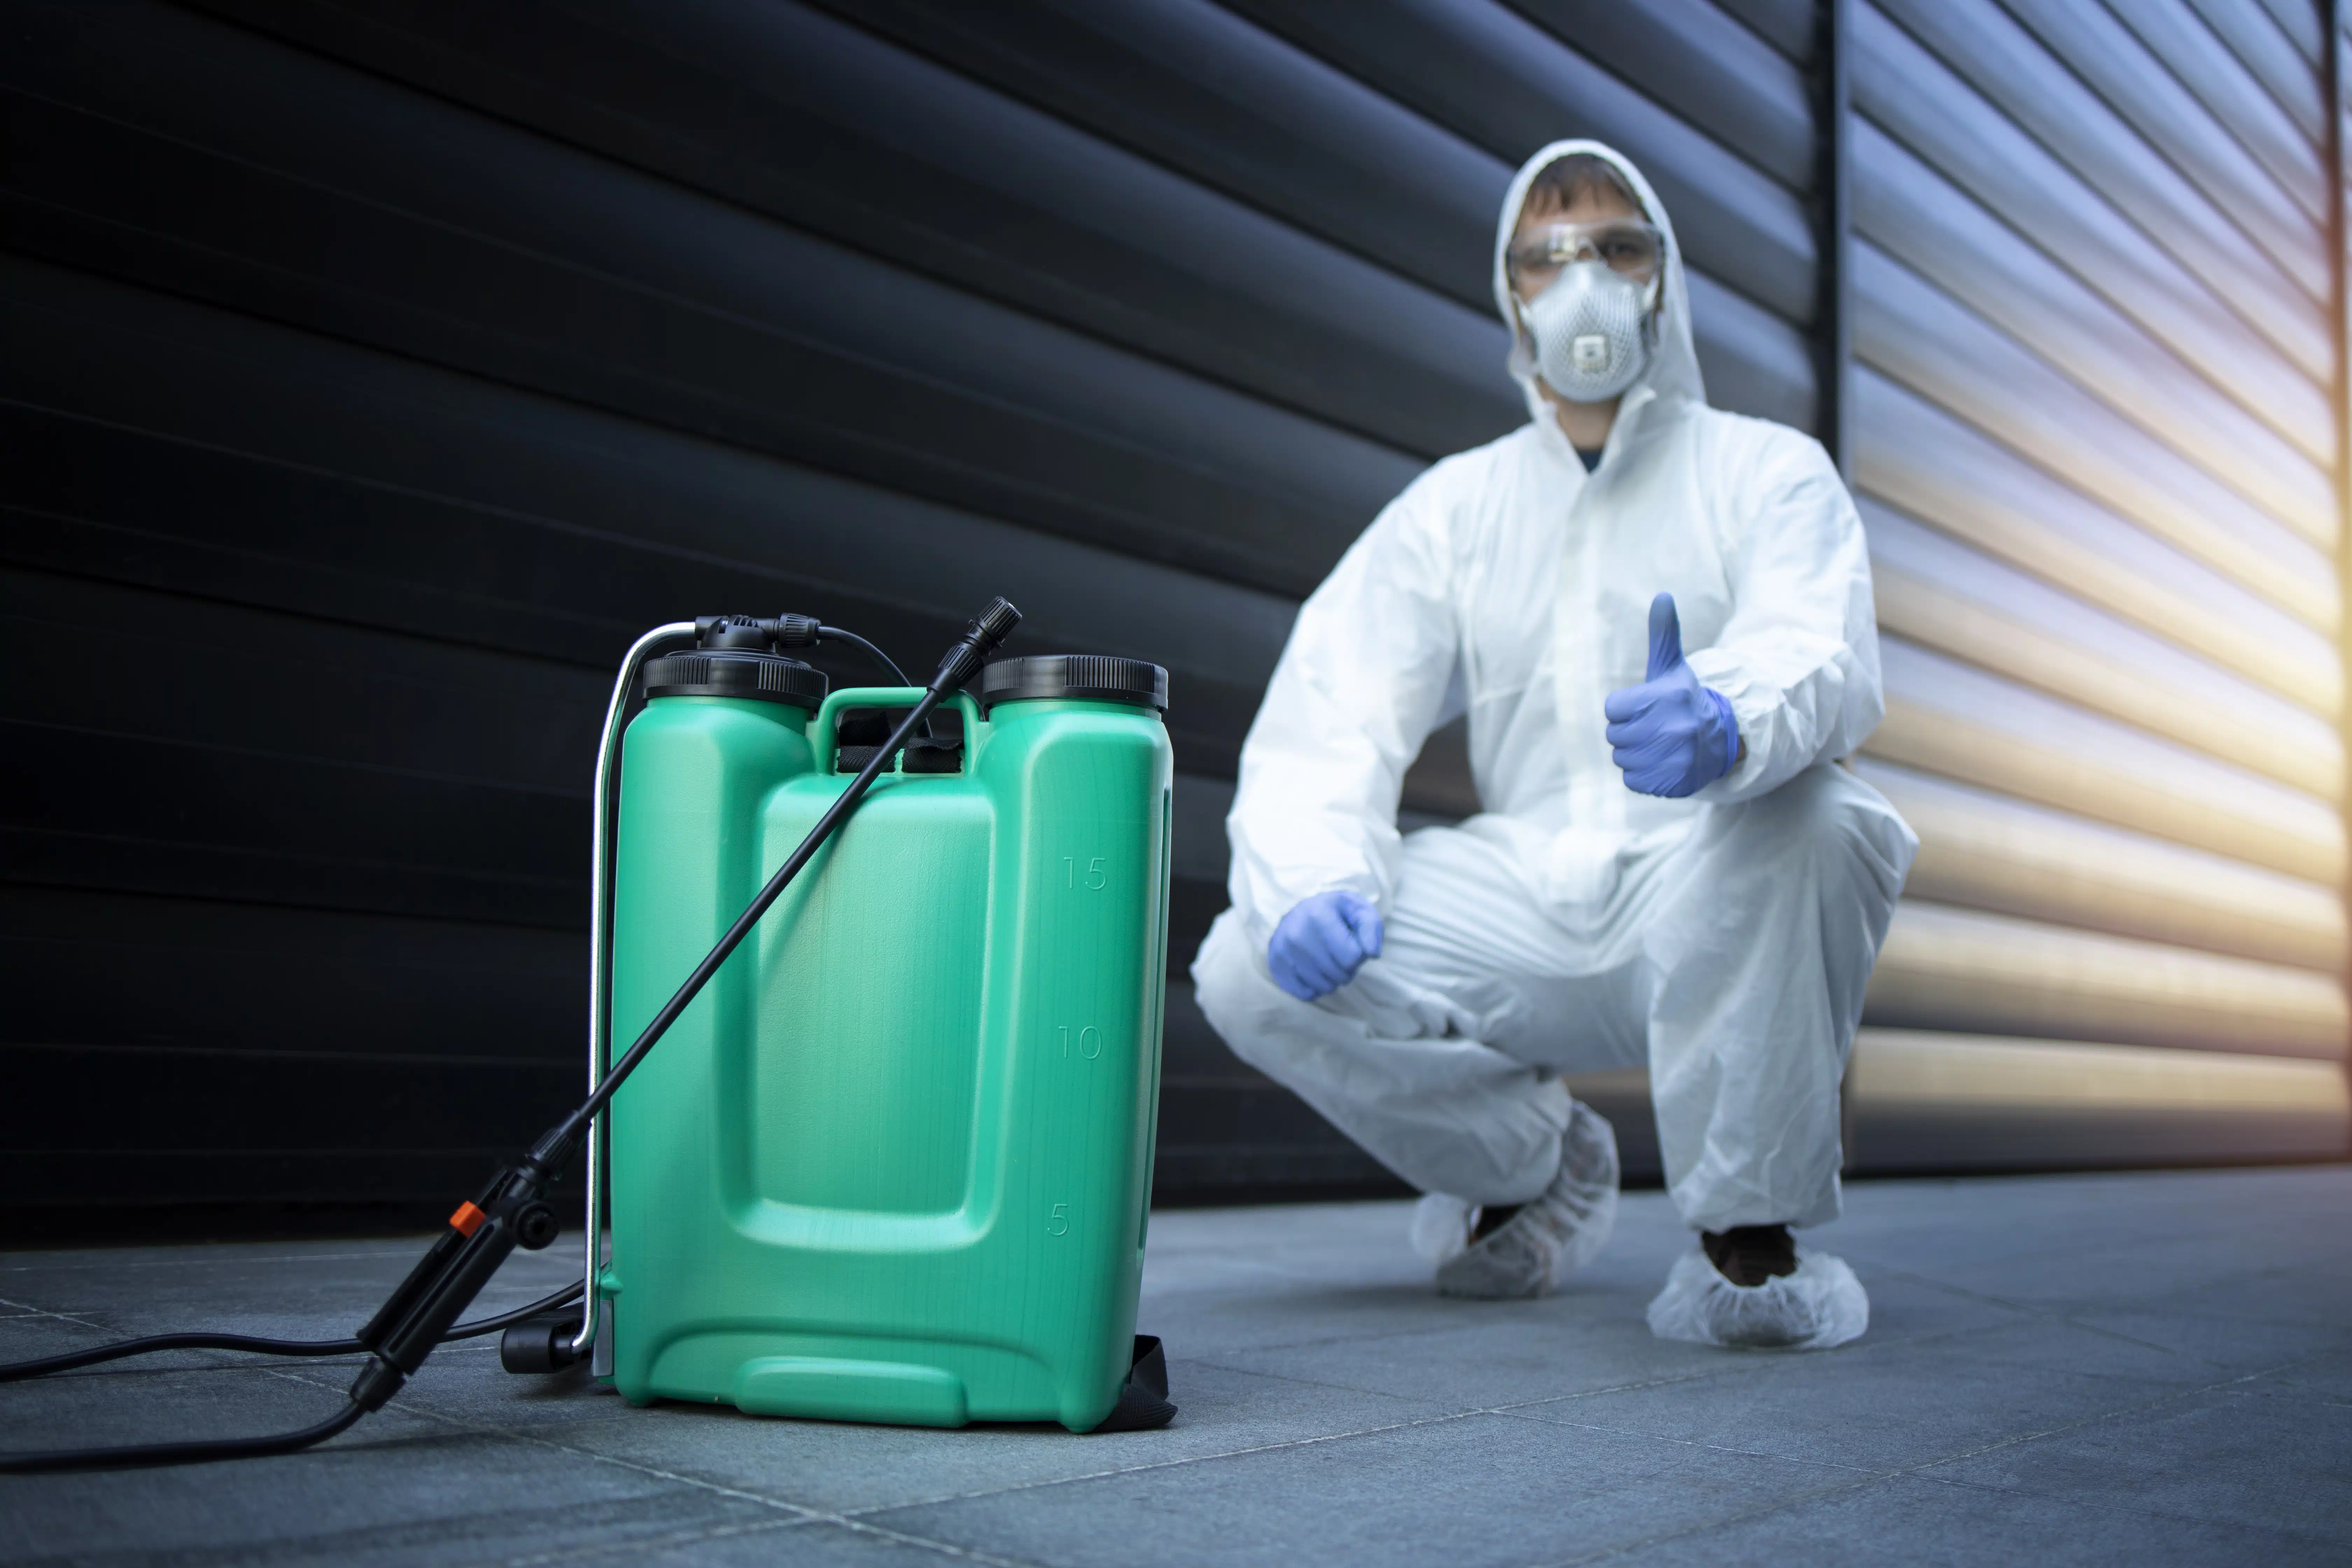 Where Can I Find New Leads For Pest Control?